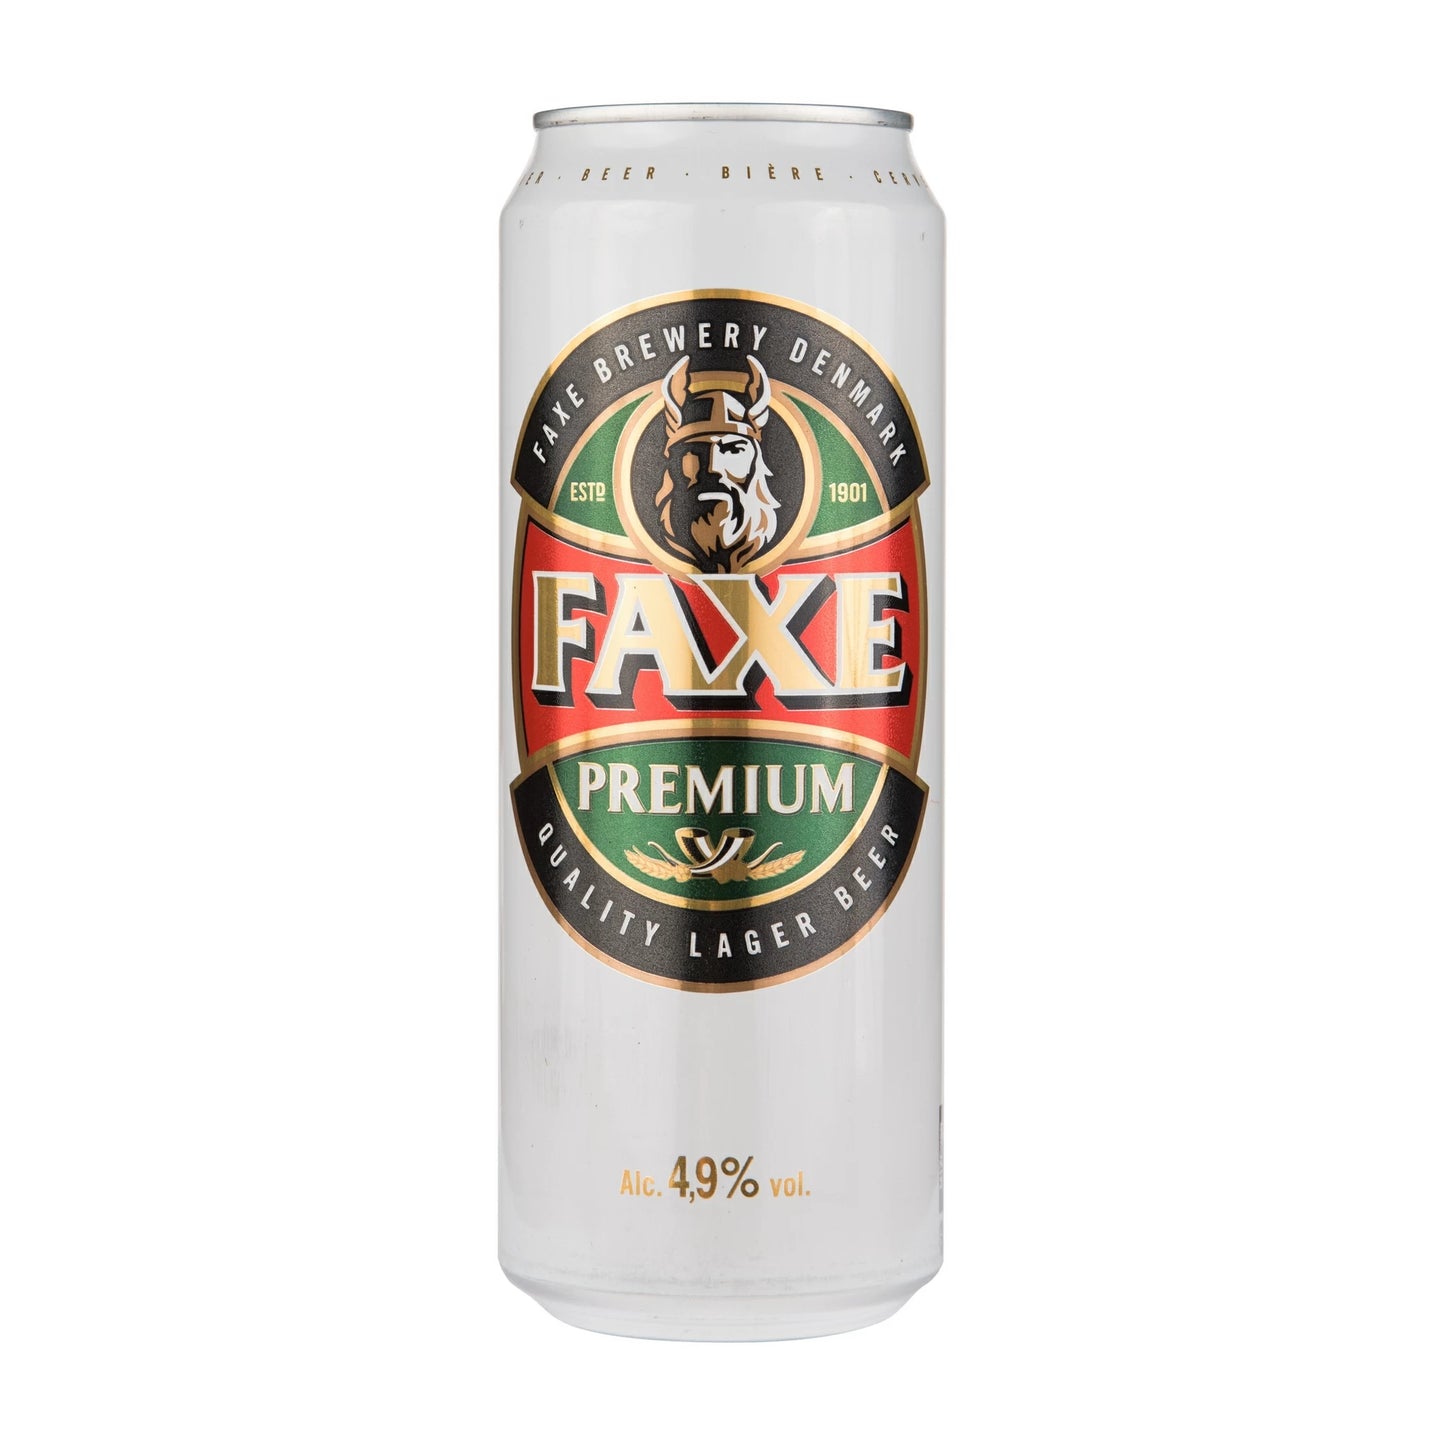 Beer Faxe Premium light filtered 5% 0.45L